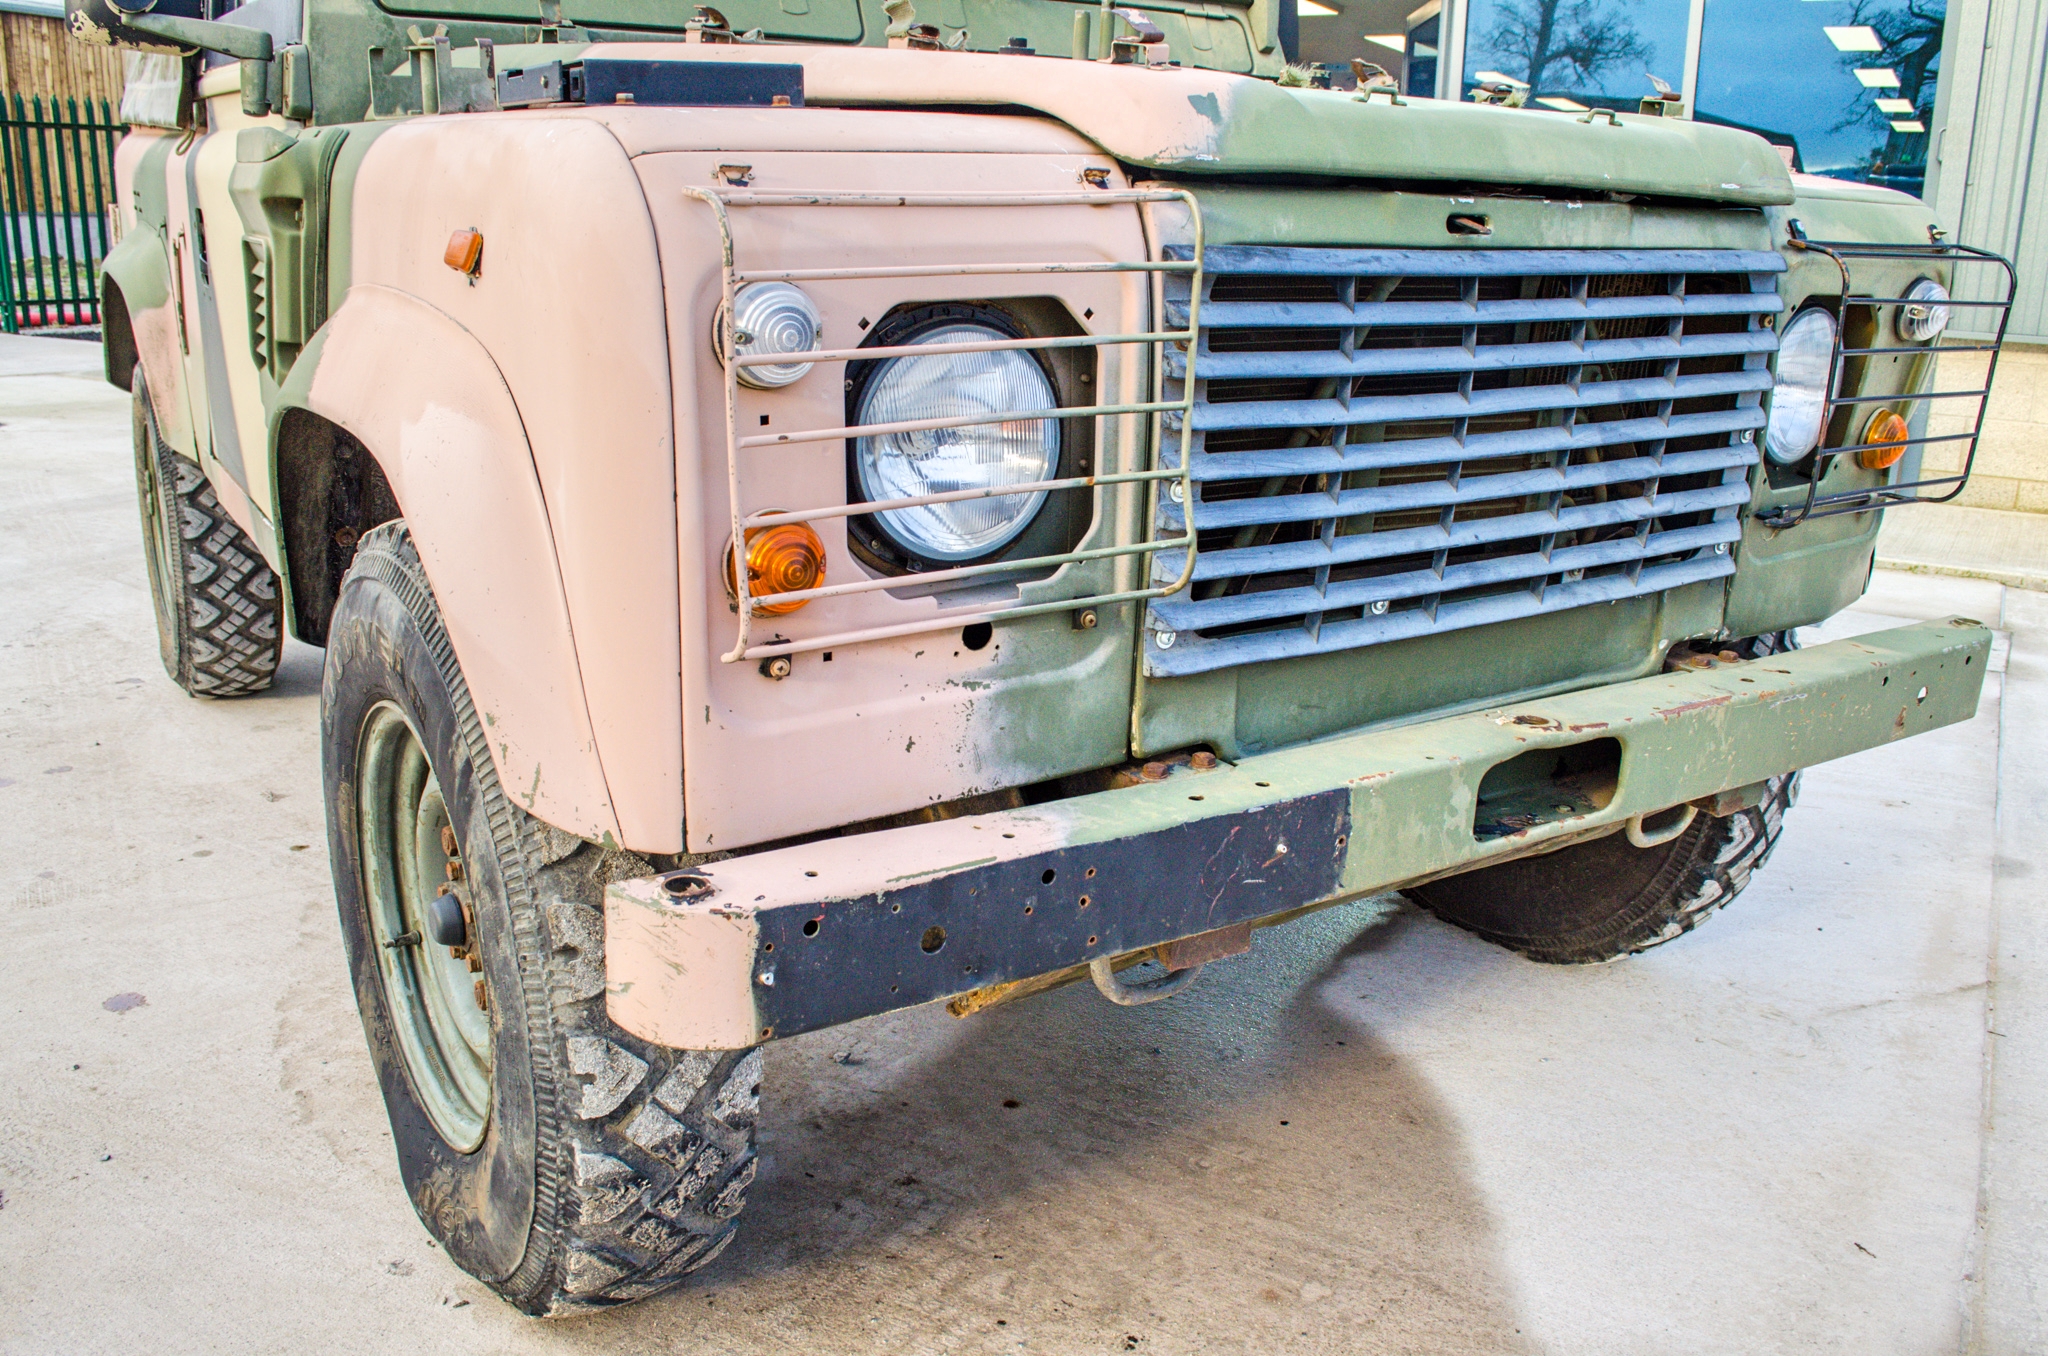 1998 Land Rover Defender 90 WOLF 2,5 litre 300TDI 4 wheel drive utility vehicle Ex MOD - Image 17 of 44